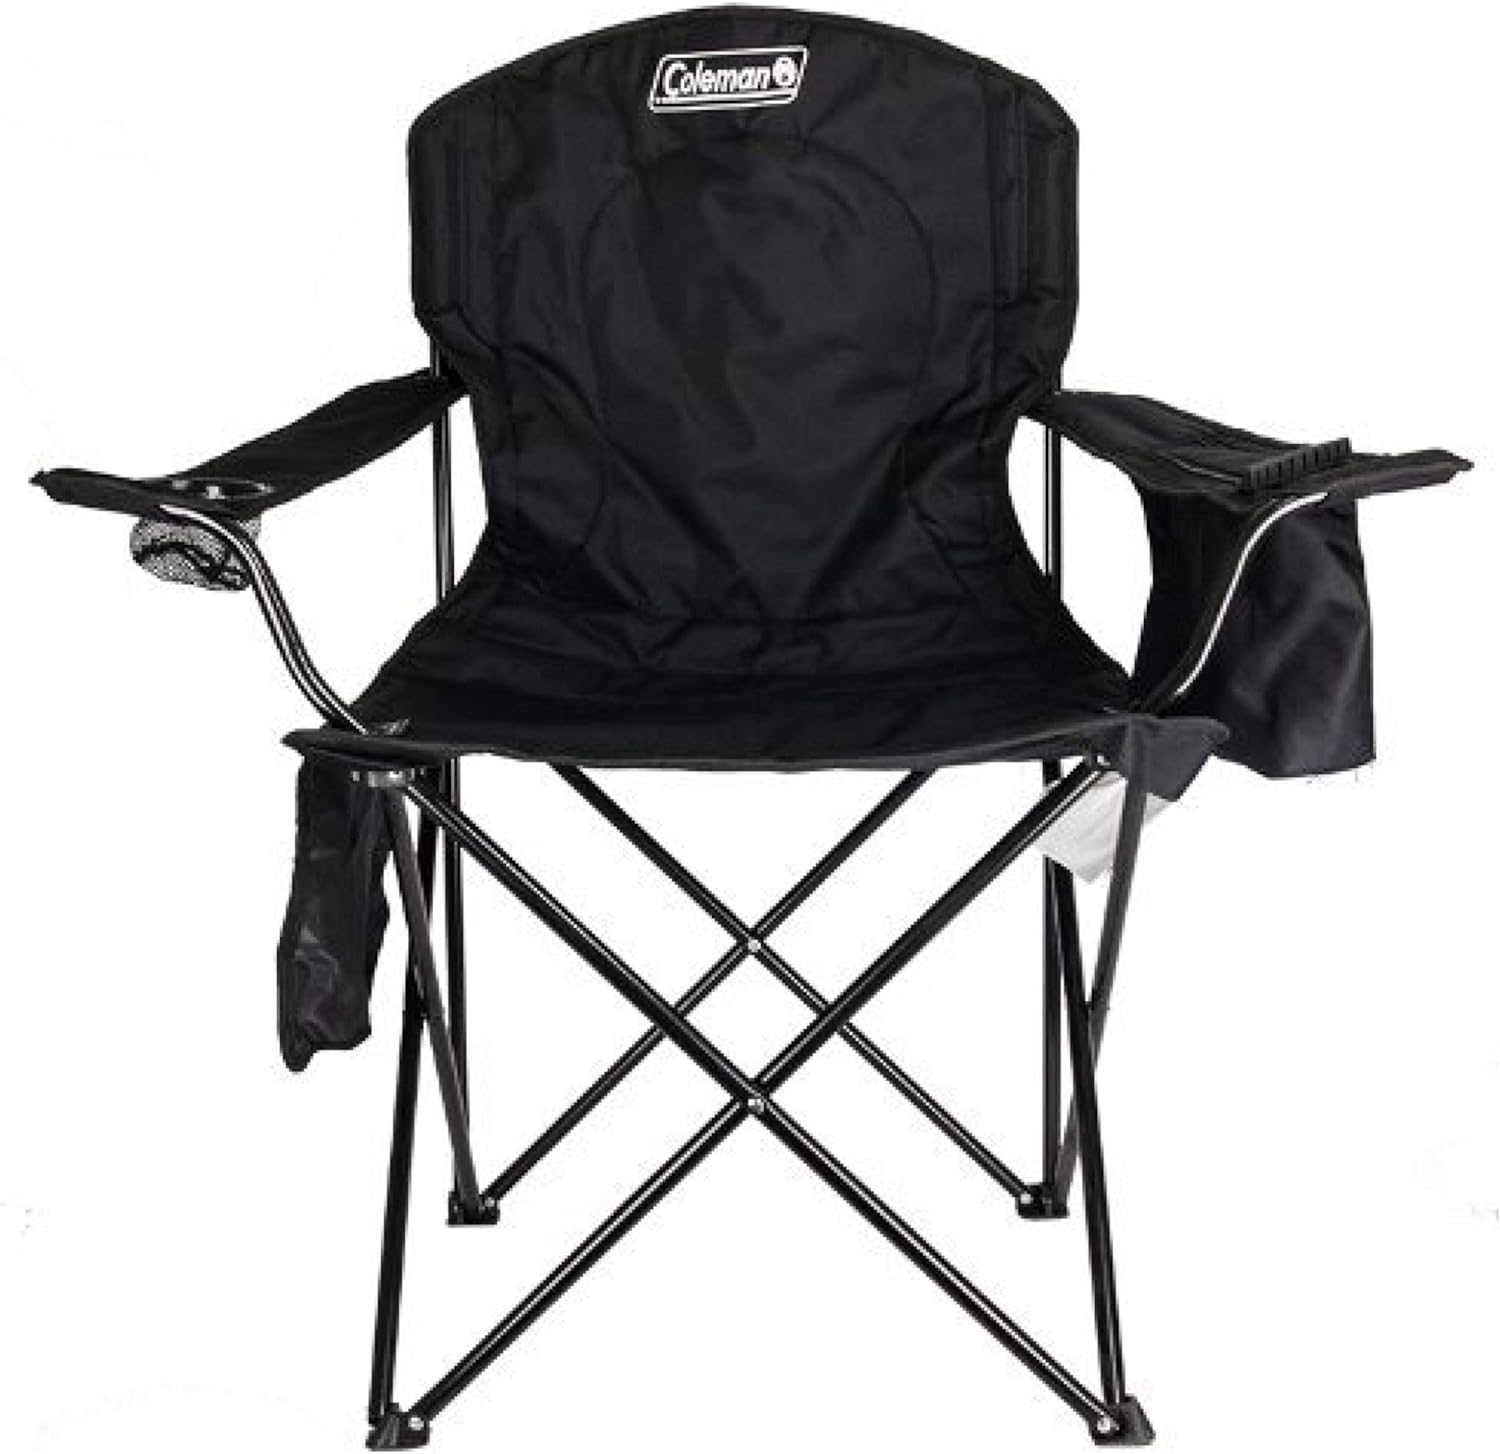 Coleman Portable Camping Chair with 4-Can Cooler